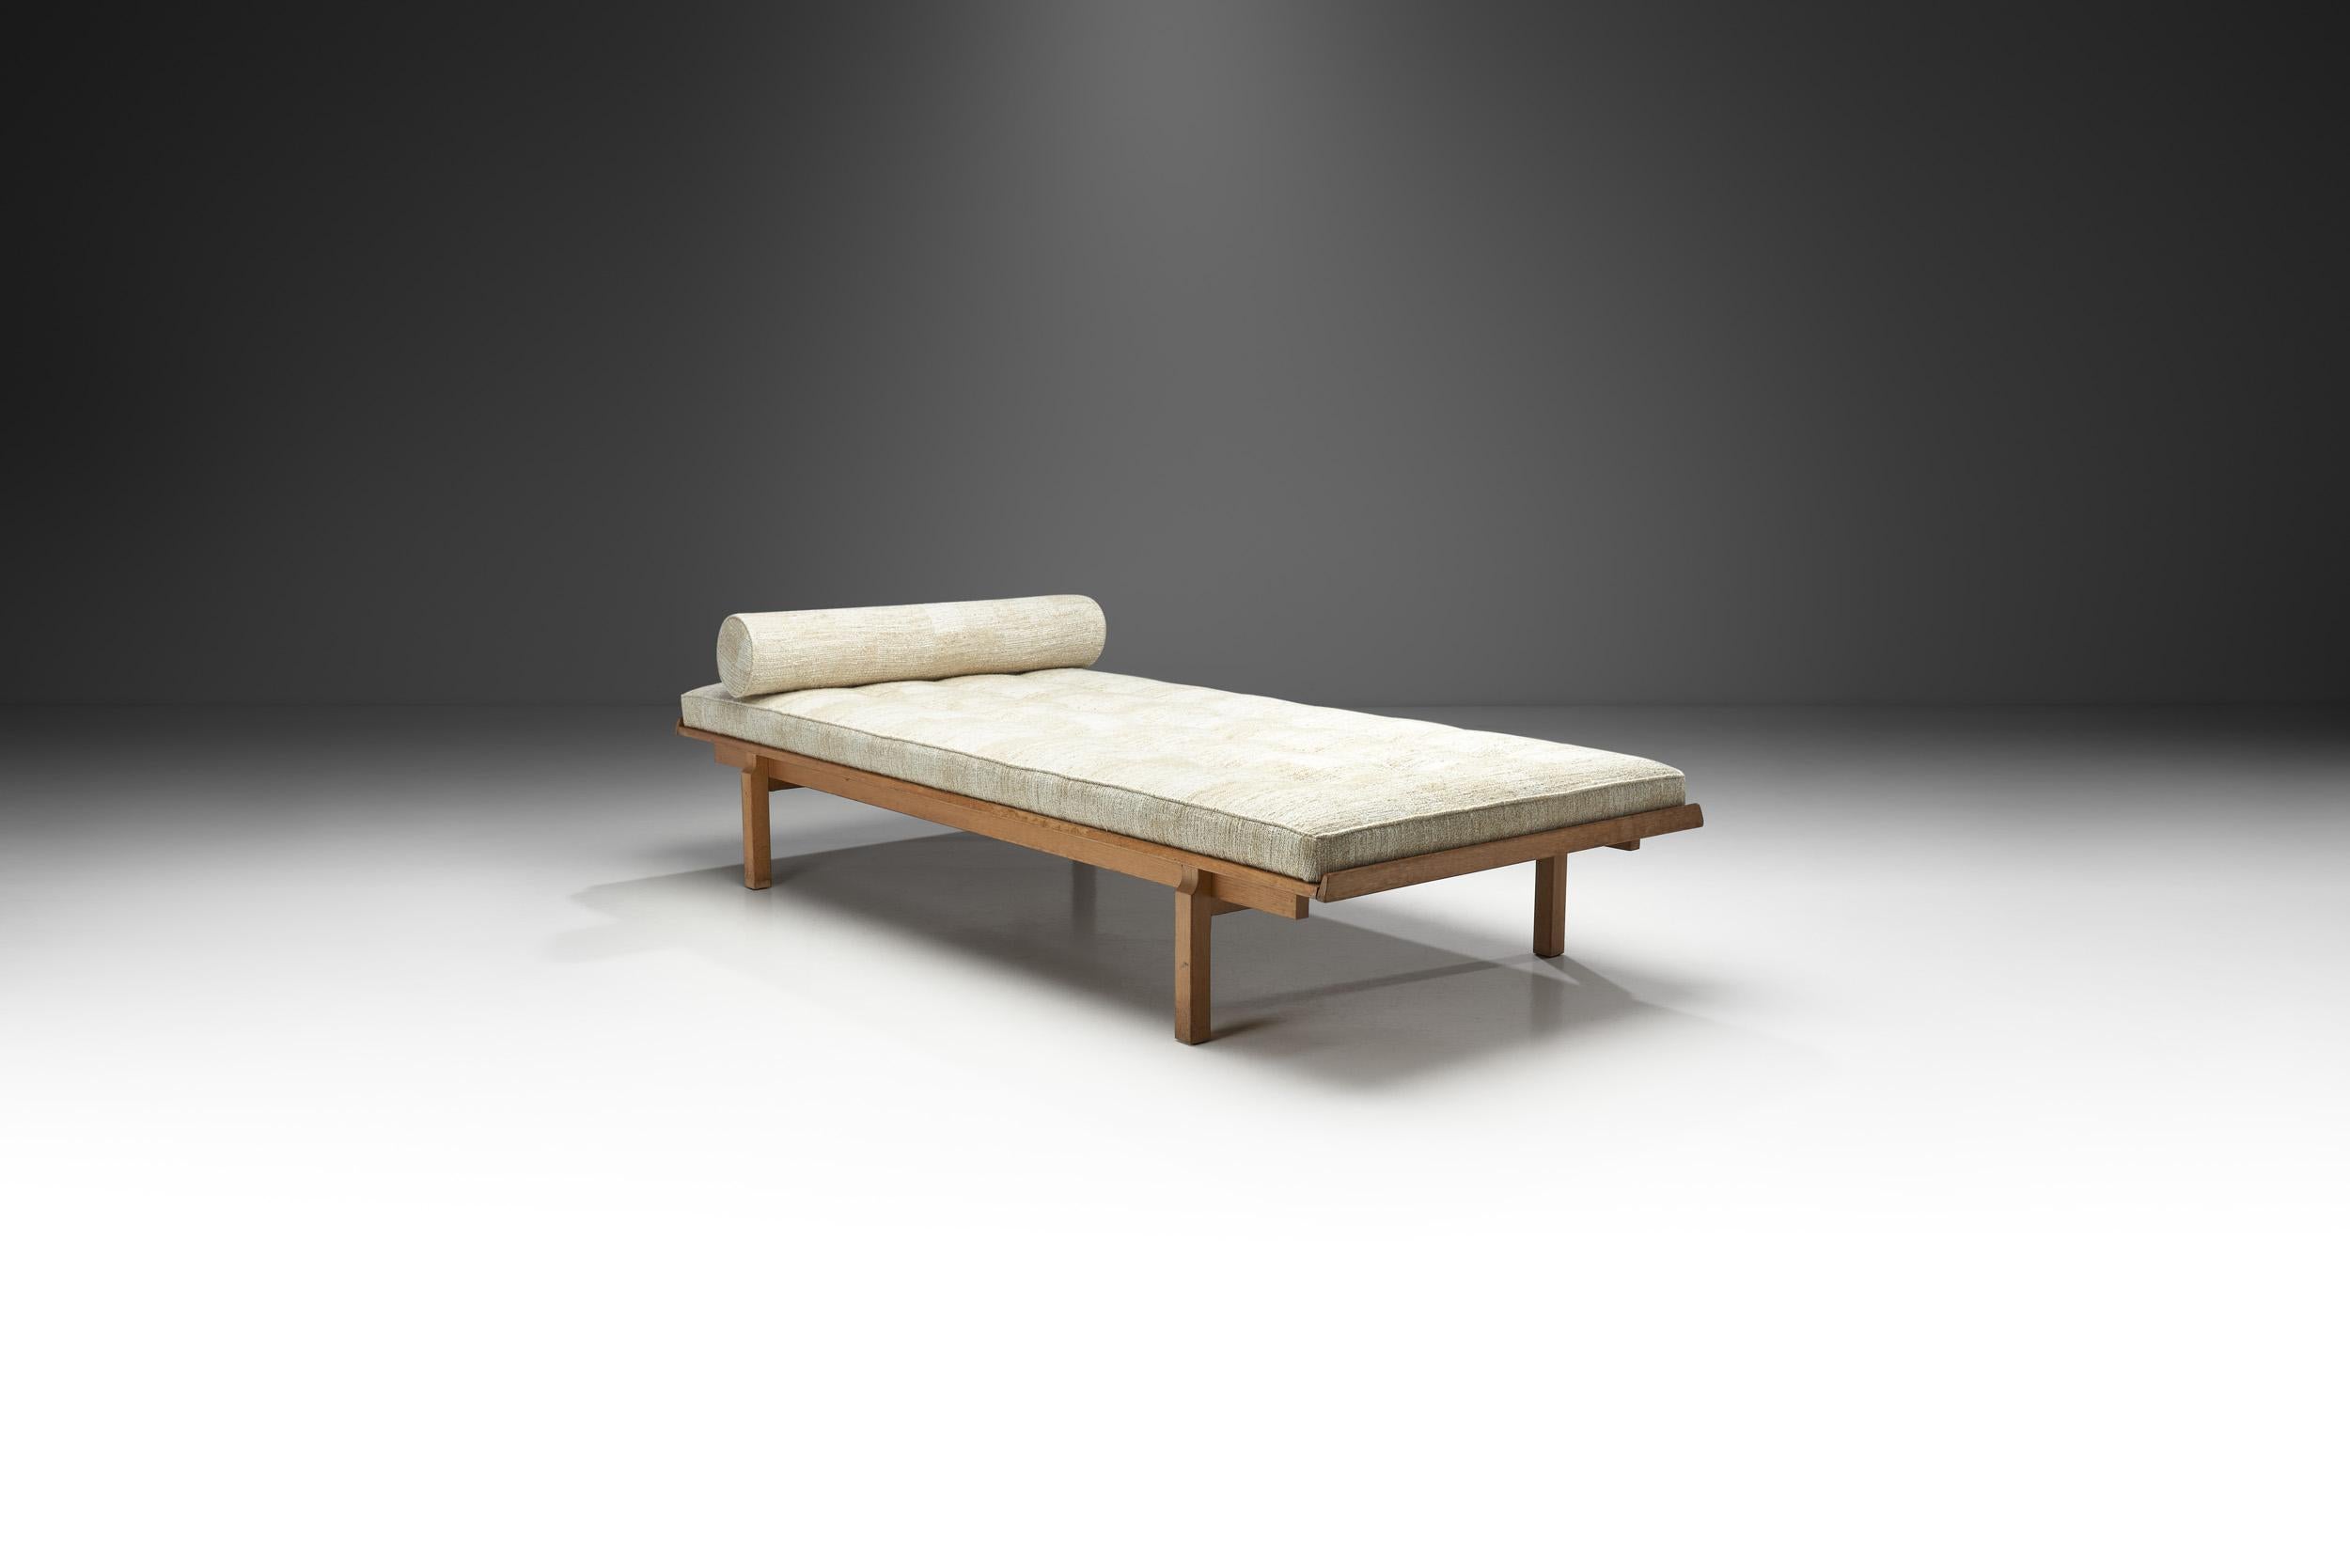 Scandinavian Modern Danish Oak Daybed with Upholstered Mattress and Pillow, Denmark, ca 1950s For Sale